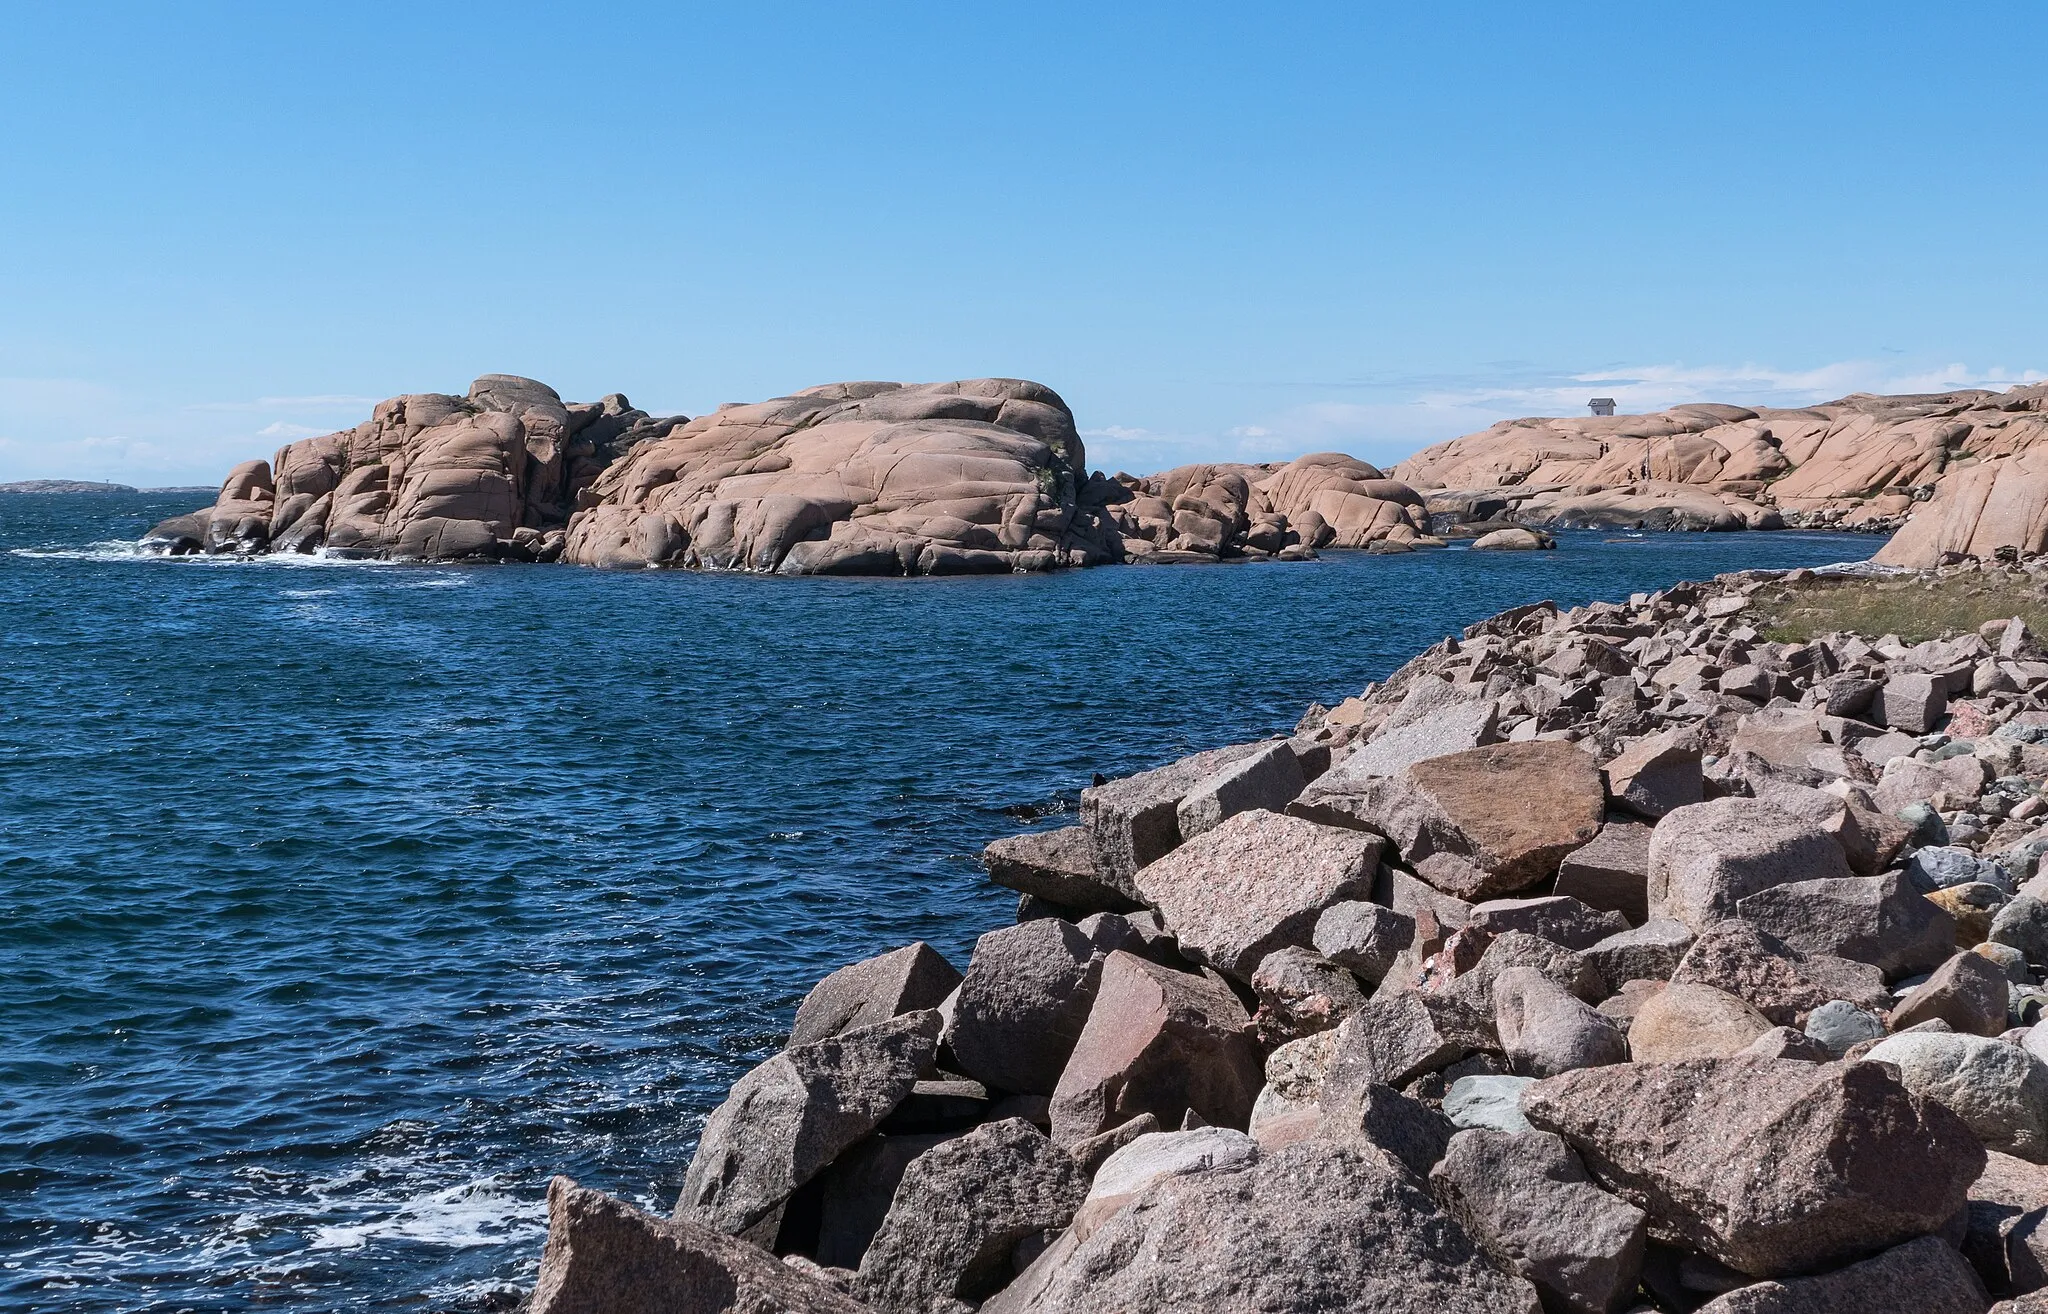 Photo showing: The glittering cliffs at Stångehuvud nature reserve in Lysekil, Sweden. The red granite cliffs are noted for their colour and the large feldspar and mica crystals (about 10 x 10 mm) that make any part of the cliffs glitter when the sun reflects off them. The cliffs in the nature reserve were saved from quarrying at the beginning of the 20th century by Calla Curman. She bought the whole area and donated it to Royal Swedish Academy of Sciences in 1925. This image illustrates how light, at different angles, is reflected off the feldspar crystals in the rock.